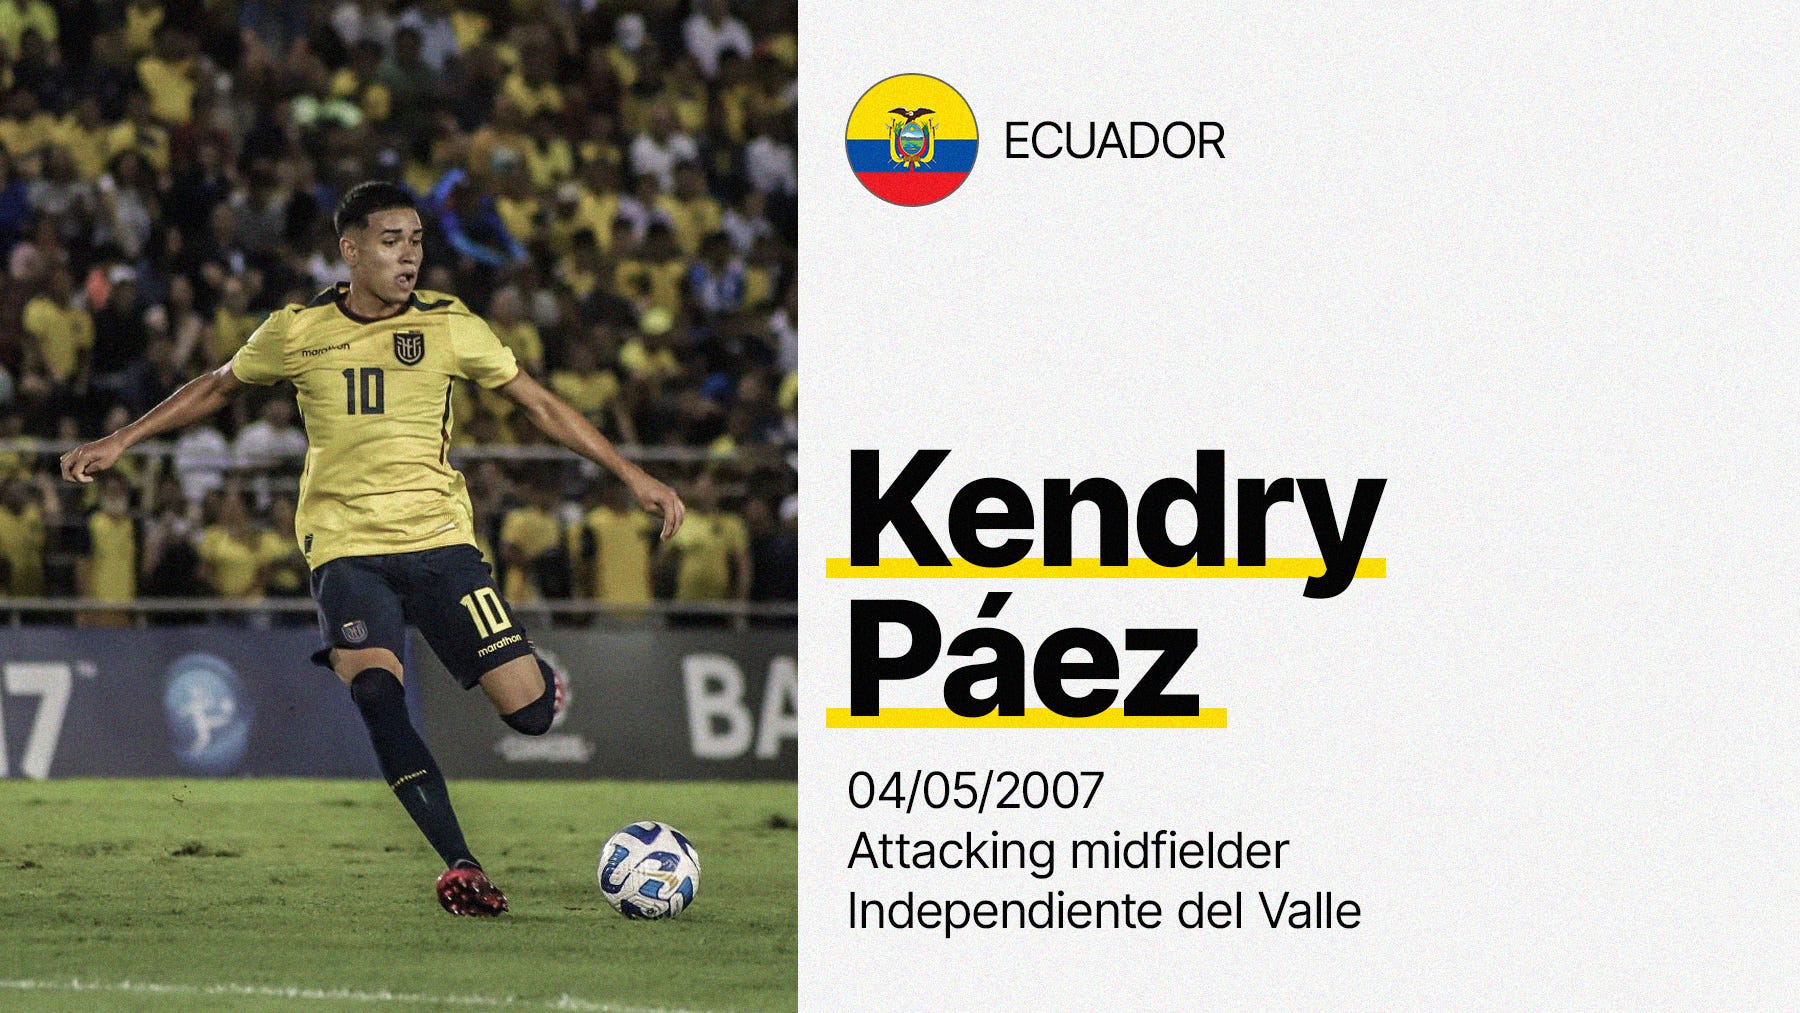 A photo of Kendry Páez in the process of striking the ball while playing for Ecuador's U-17 team with a brief information panel about him, including Japan flag, date of birth, position and club.